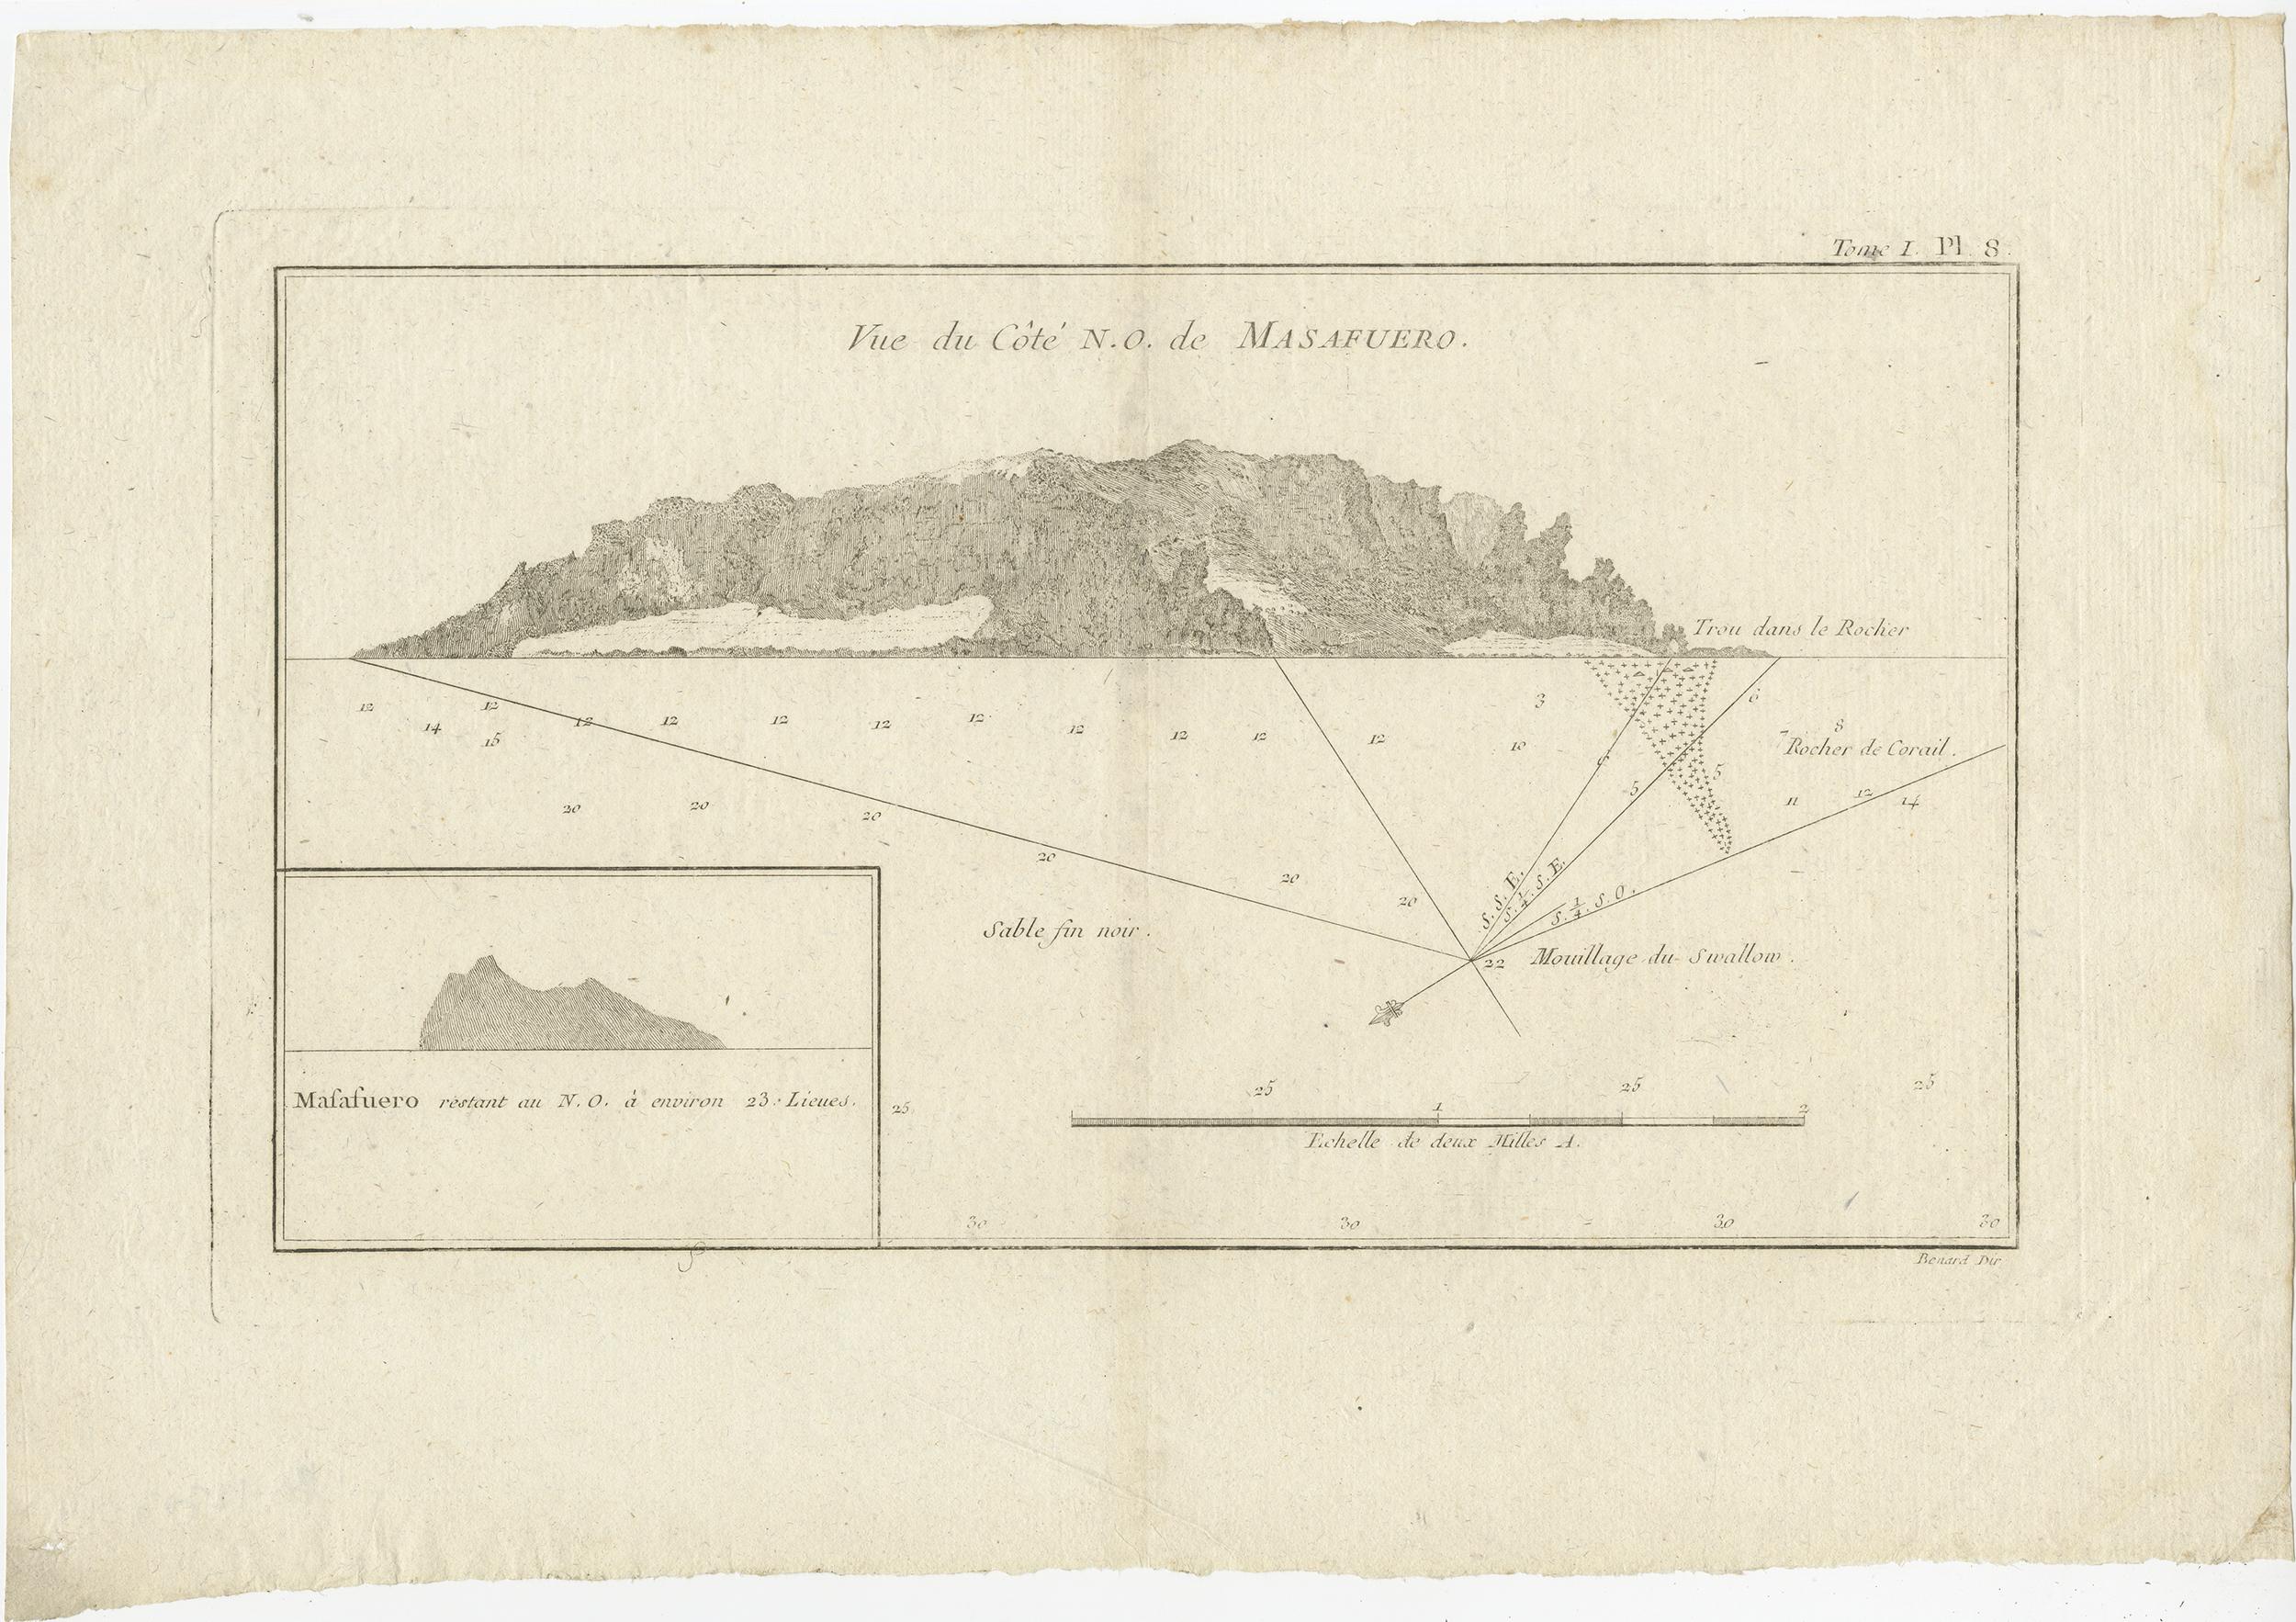 Antique map titled 'Vue de Cote N.O. de Masafuero'. Profile view of the north-west coast of Masafuera Island (also called Alejandro Selkirk Island). It also shows the anchorage of the Swallow and depth soundings.

Published in an edition of John